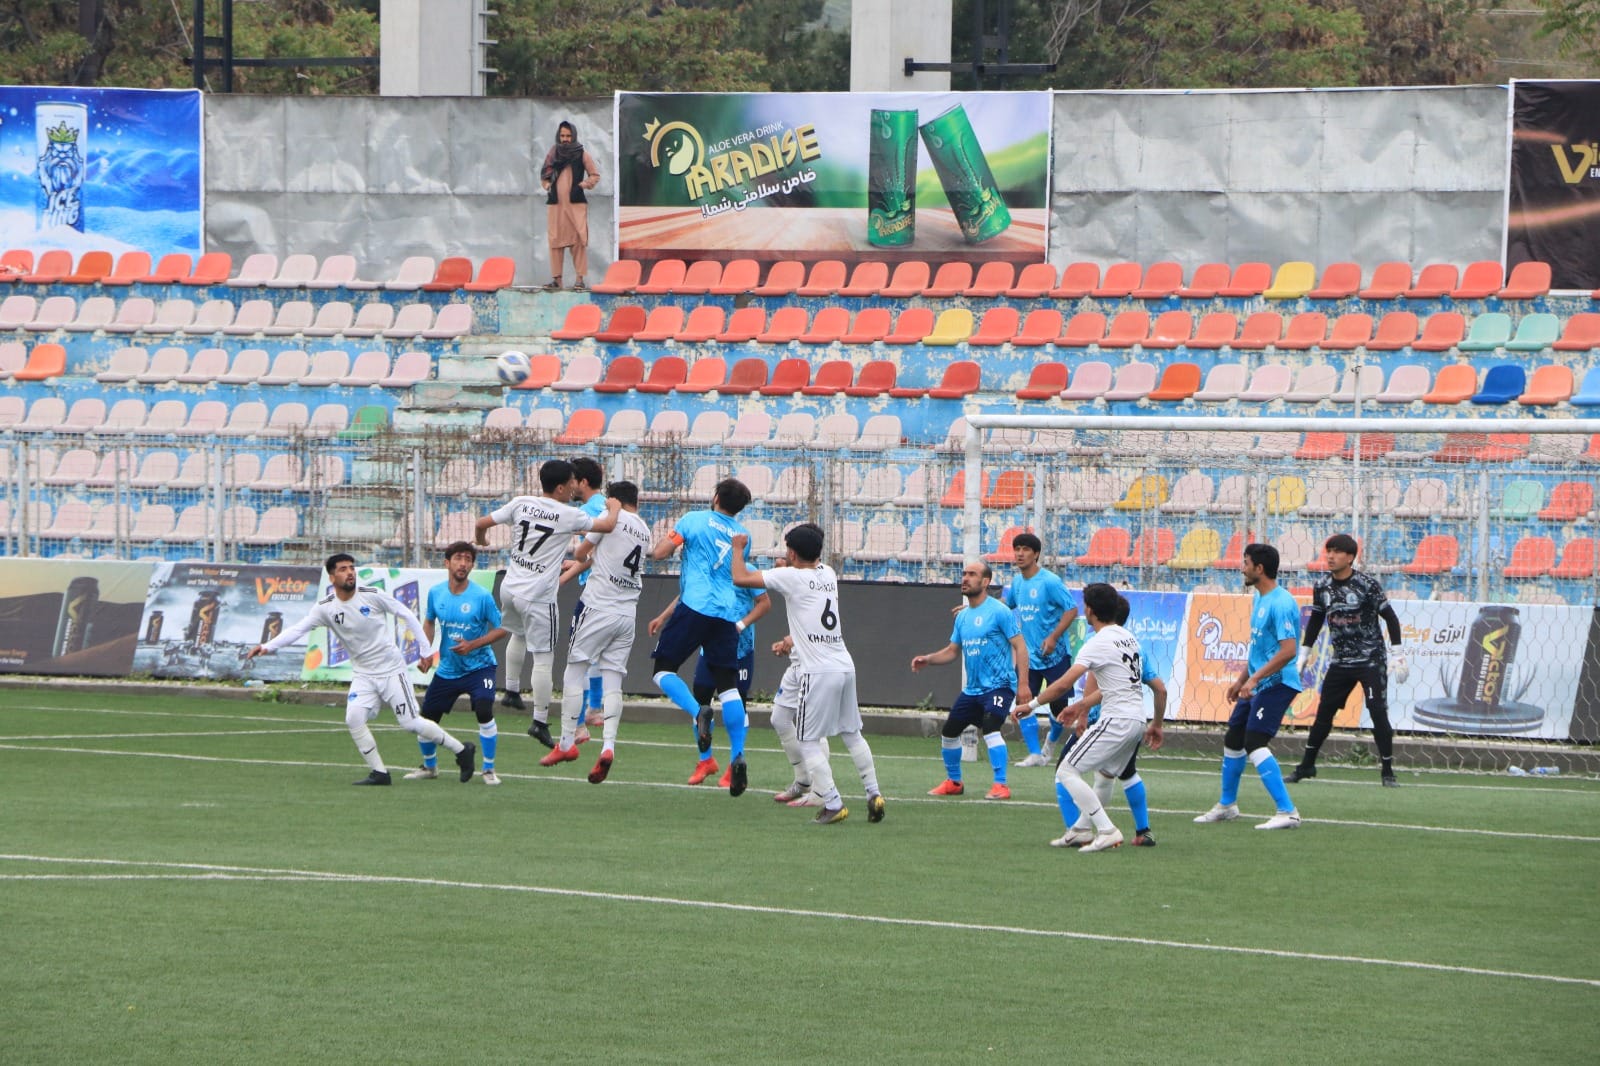 In the continuation of the third season of the National Football Champions League, the 29th and 30th match of this competition took place between the Sar sabz Yashler against Khadim F.C and the Sorkh poshan Khafi against Esteqlal Kabul.